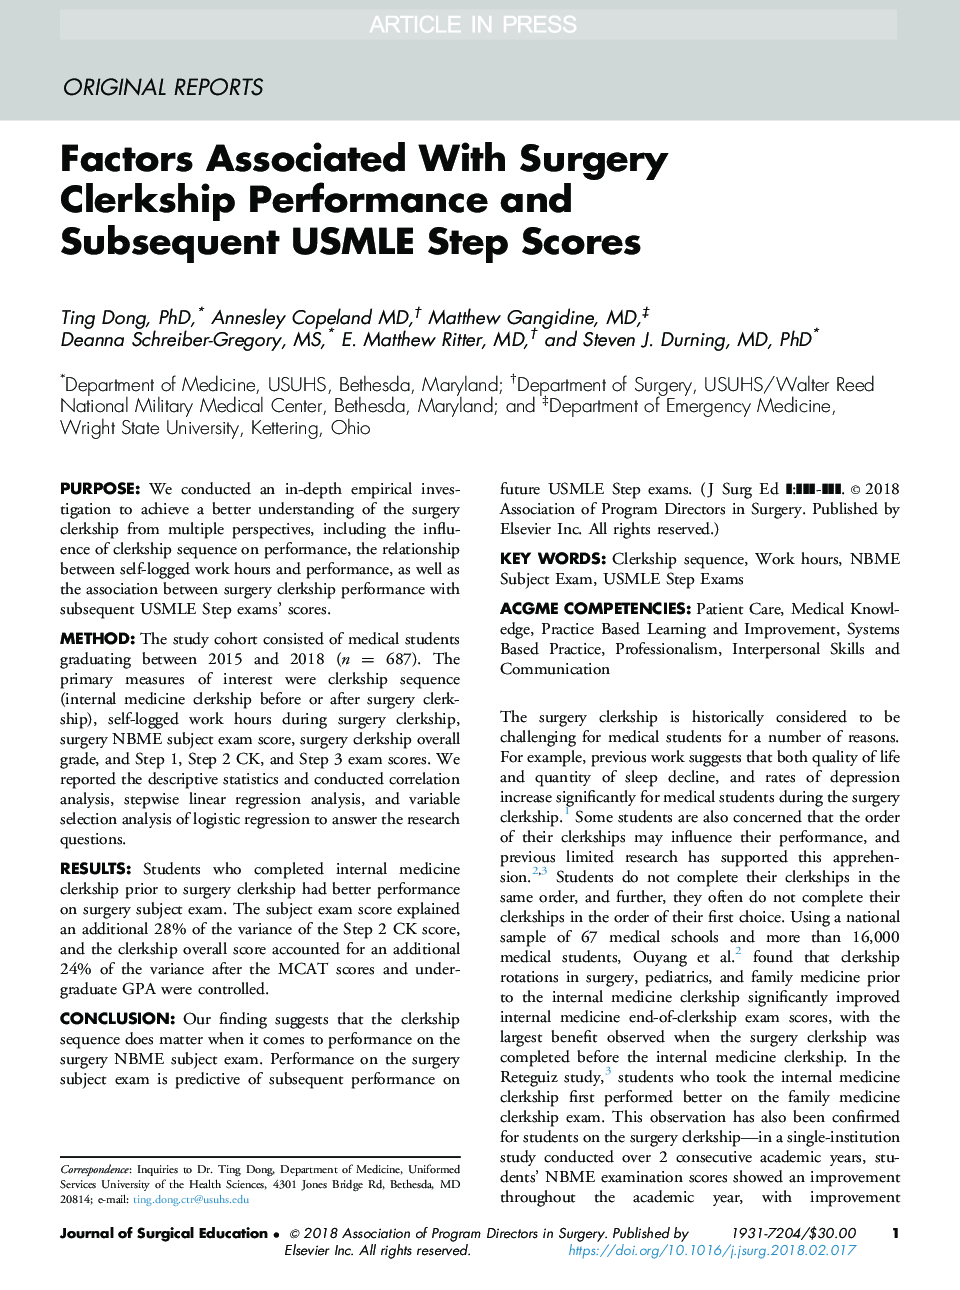 Factors Associated With Surgery Clerkship Performance and Subsequent USMLE Step Scores